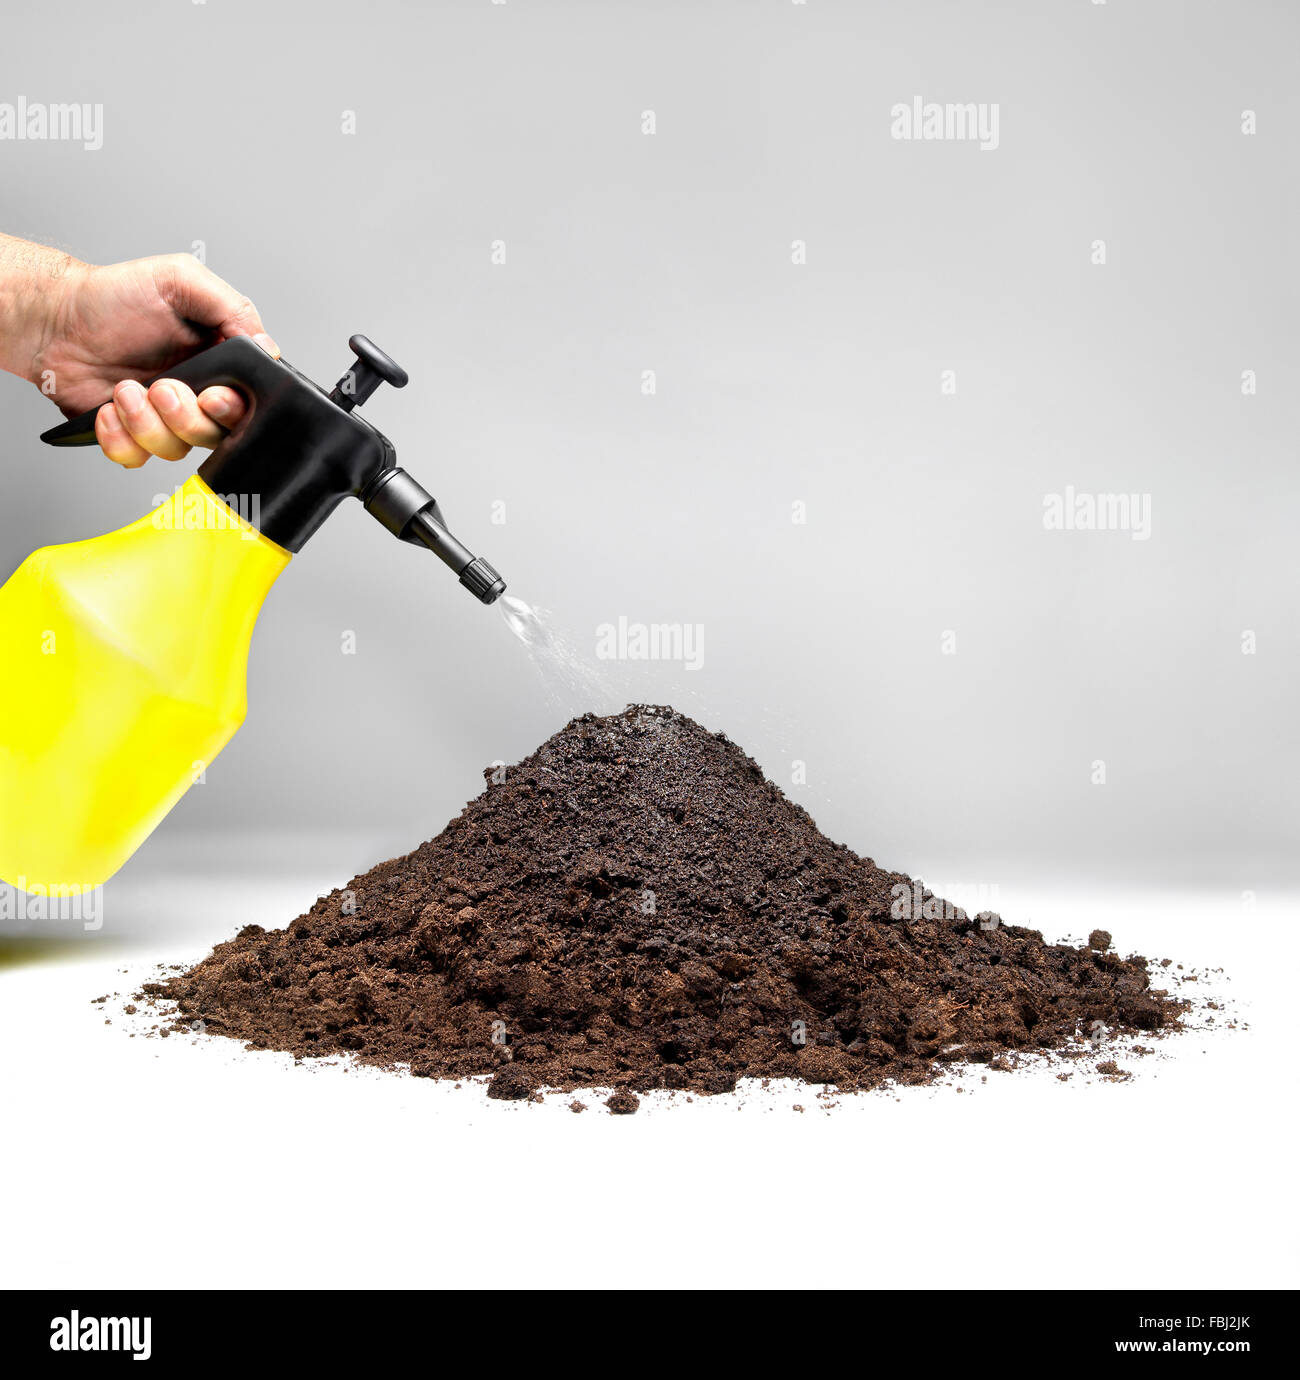 Watering a pile of soil with a sprinkler against gray background. Stock Photo